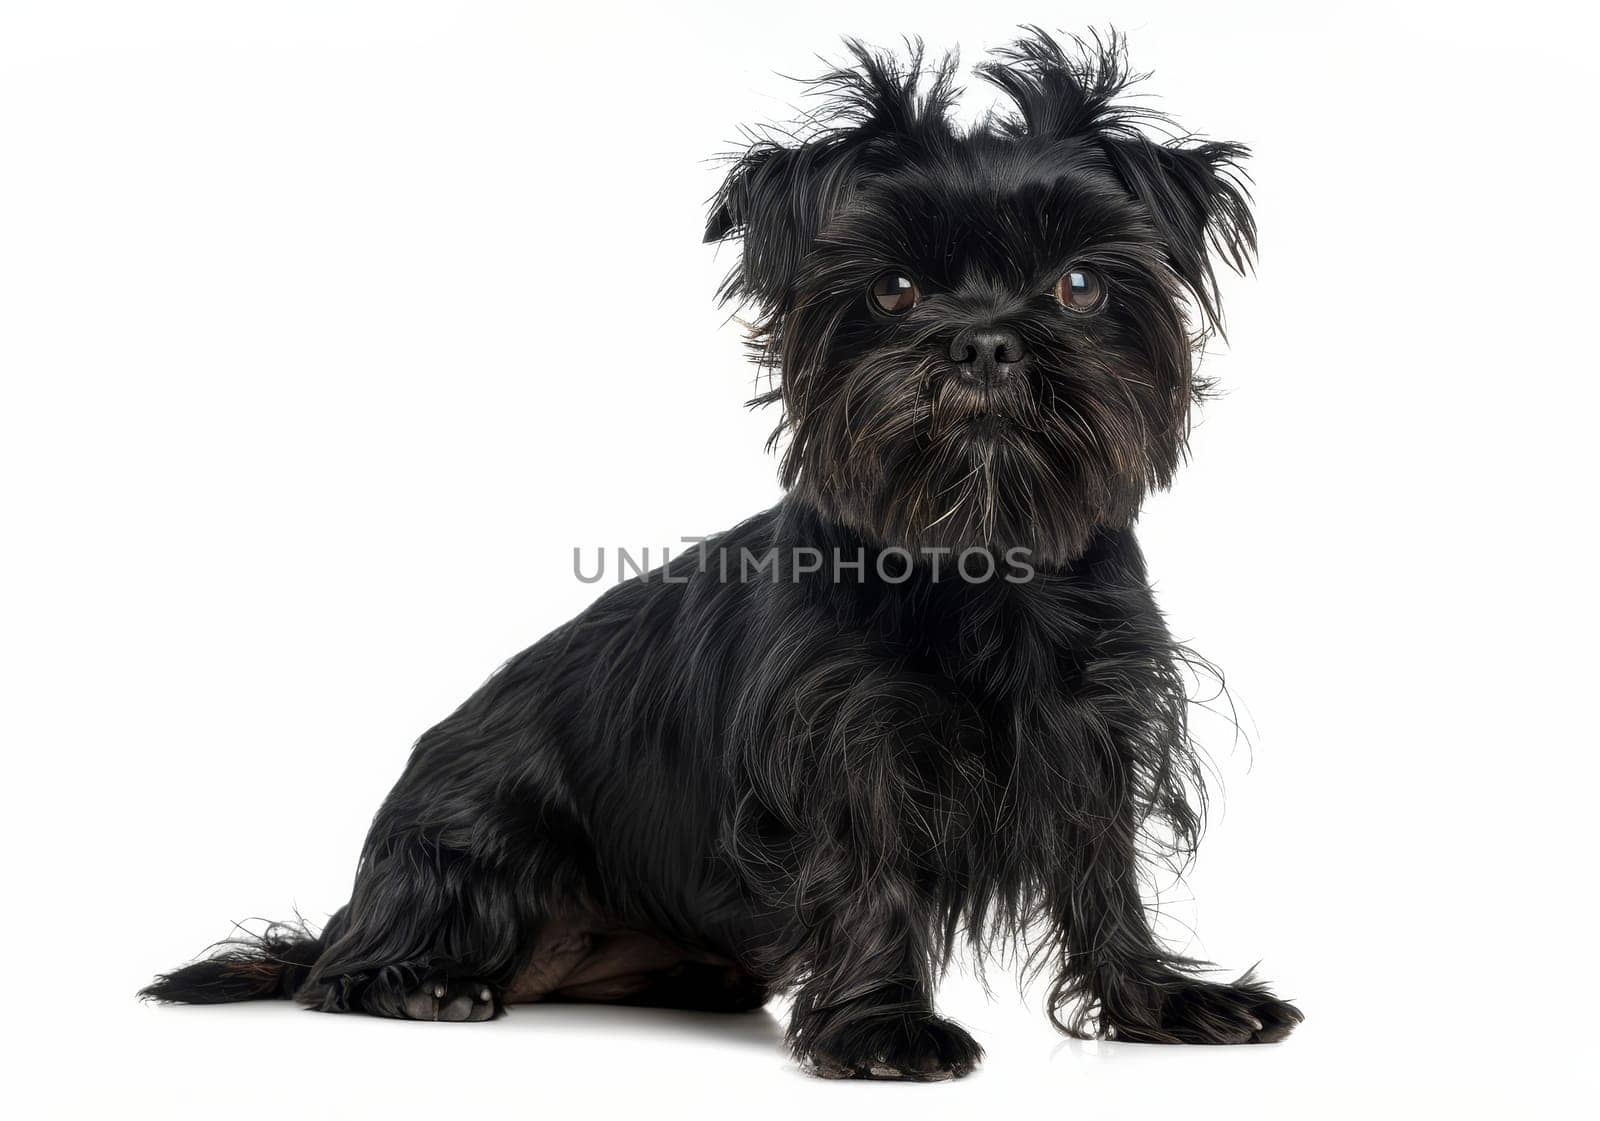 A black Affenpinscher sits proudly, showcasing its compact body and perky ears. The dog's attentive expression and lustrous coat exude confidence and breed pride. by sfinks